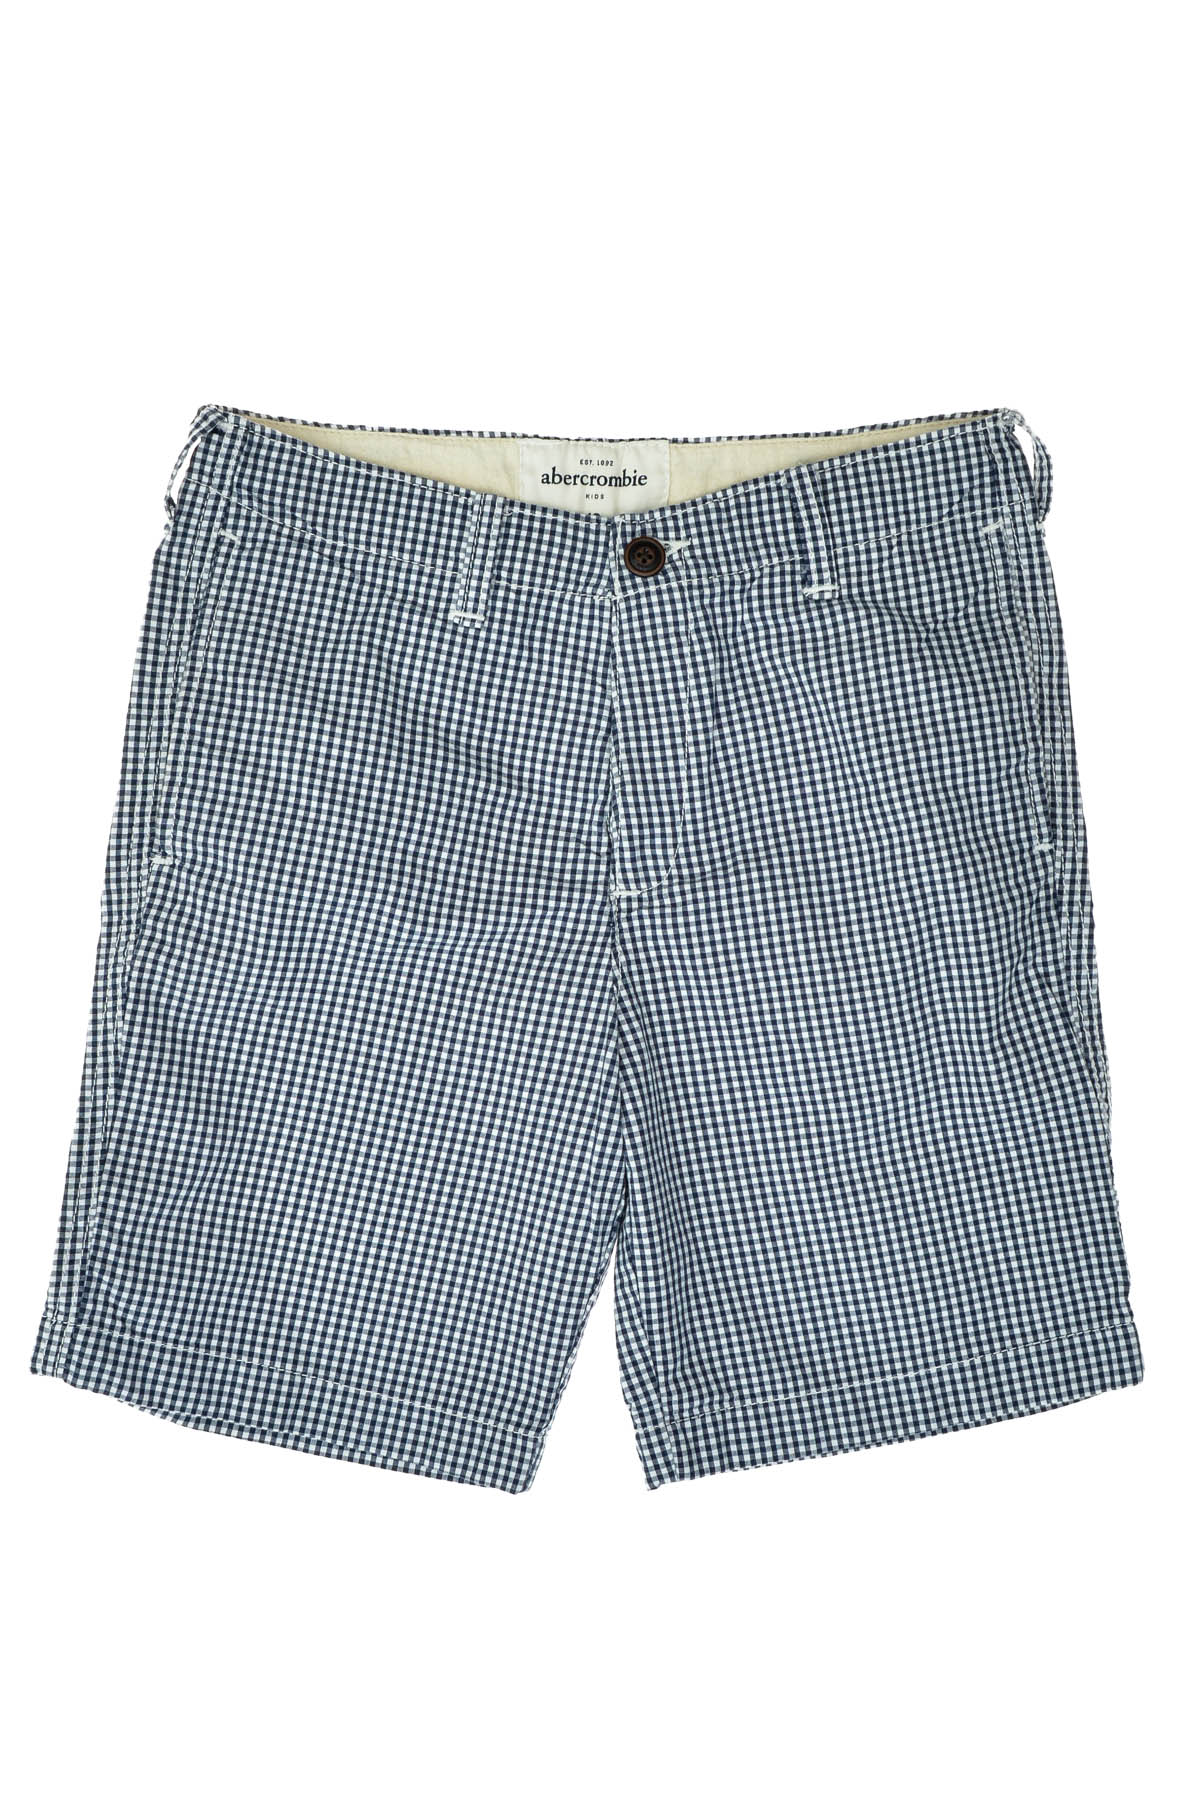 Shorts for boys - Abercrombie & Fitch - 0